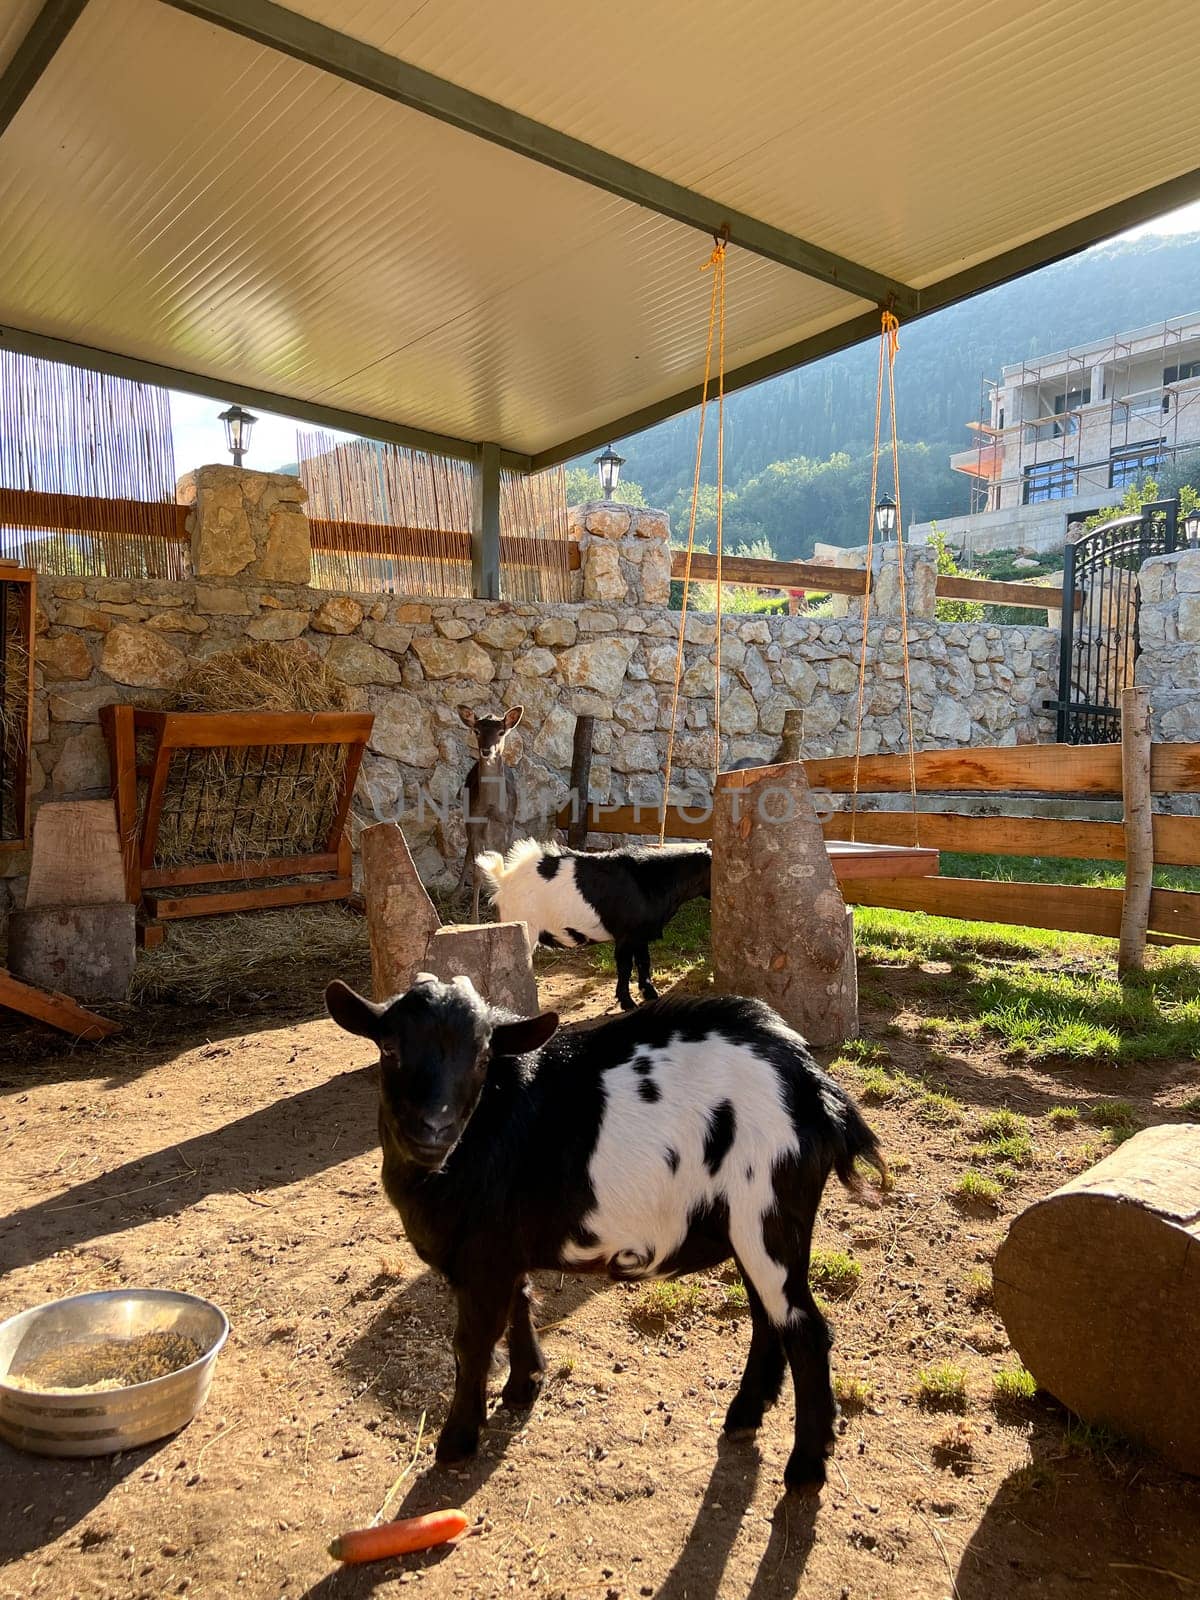 Goatling stands near a feeder with carrots in a corral . High quality photo